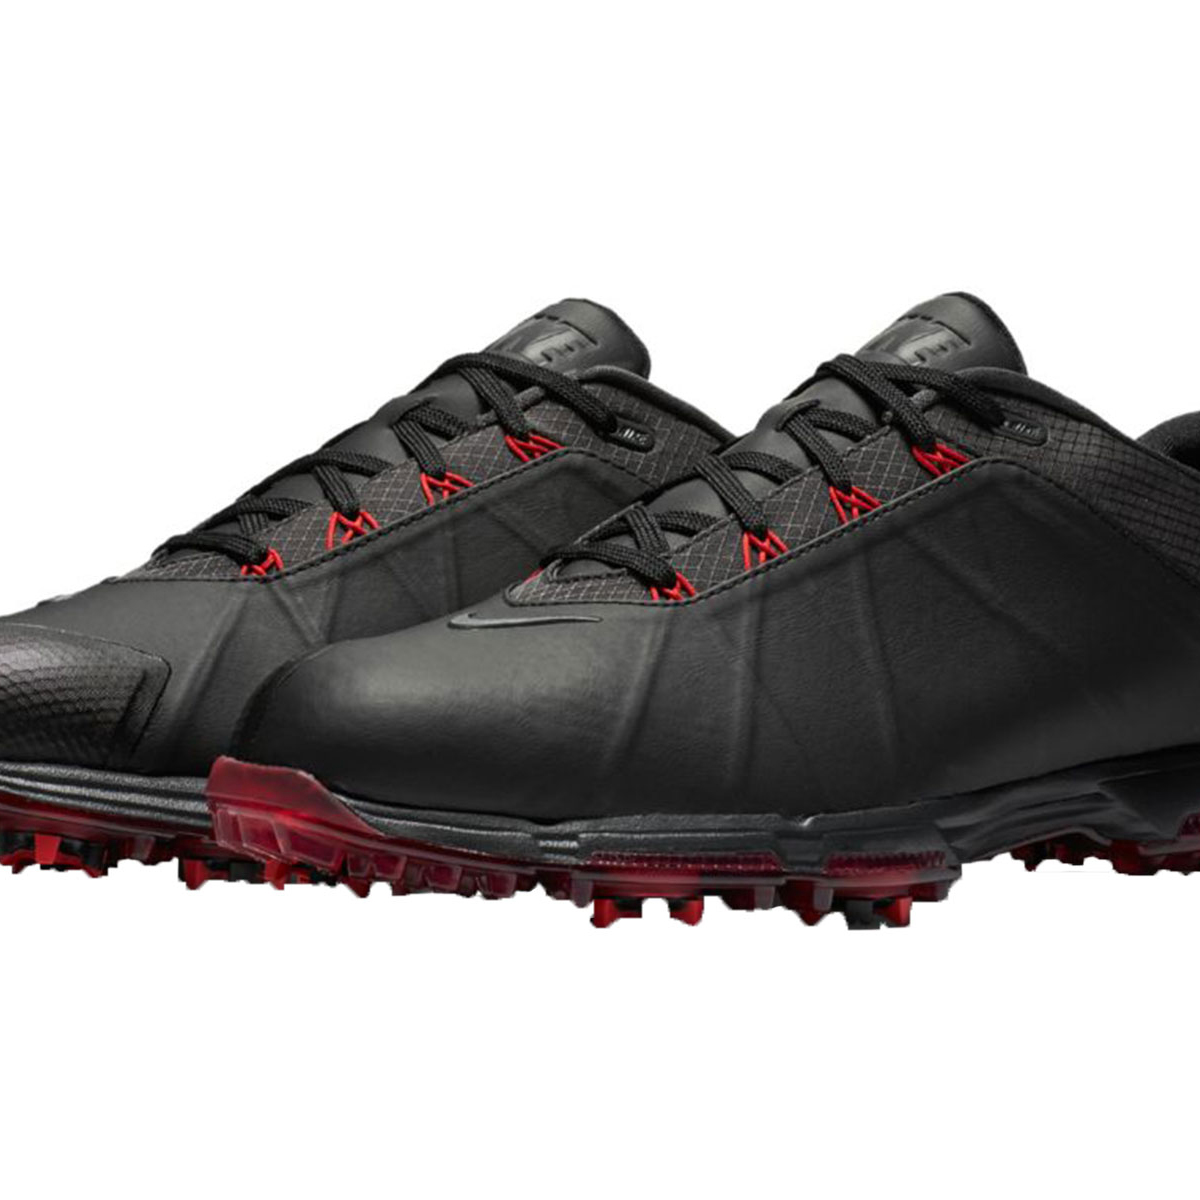 nike lunar fire golf shoes red